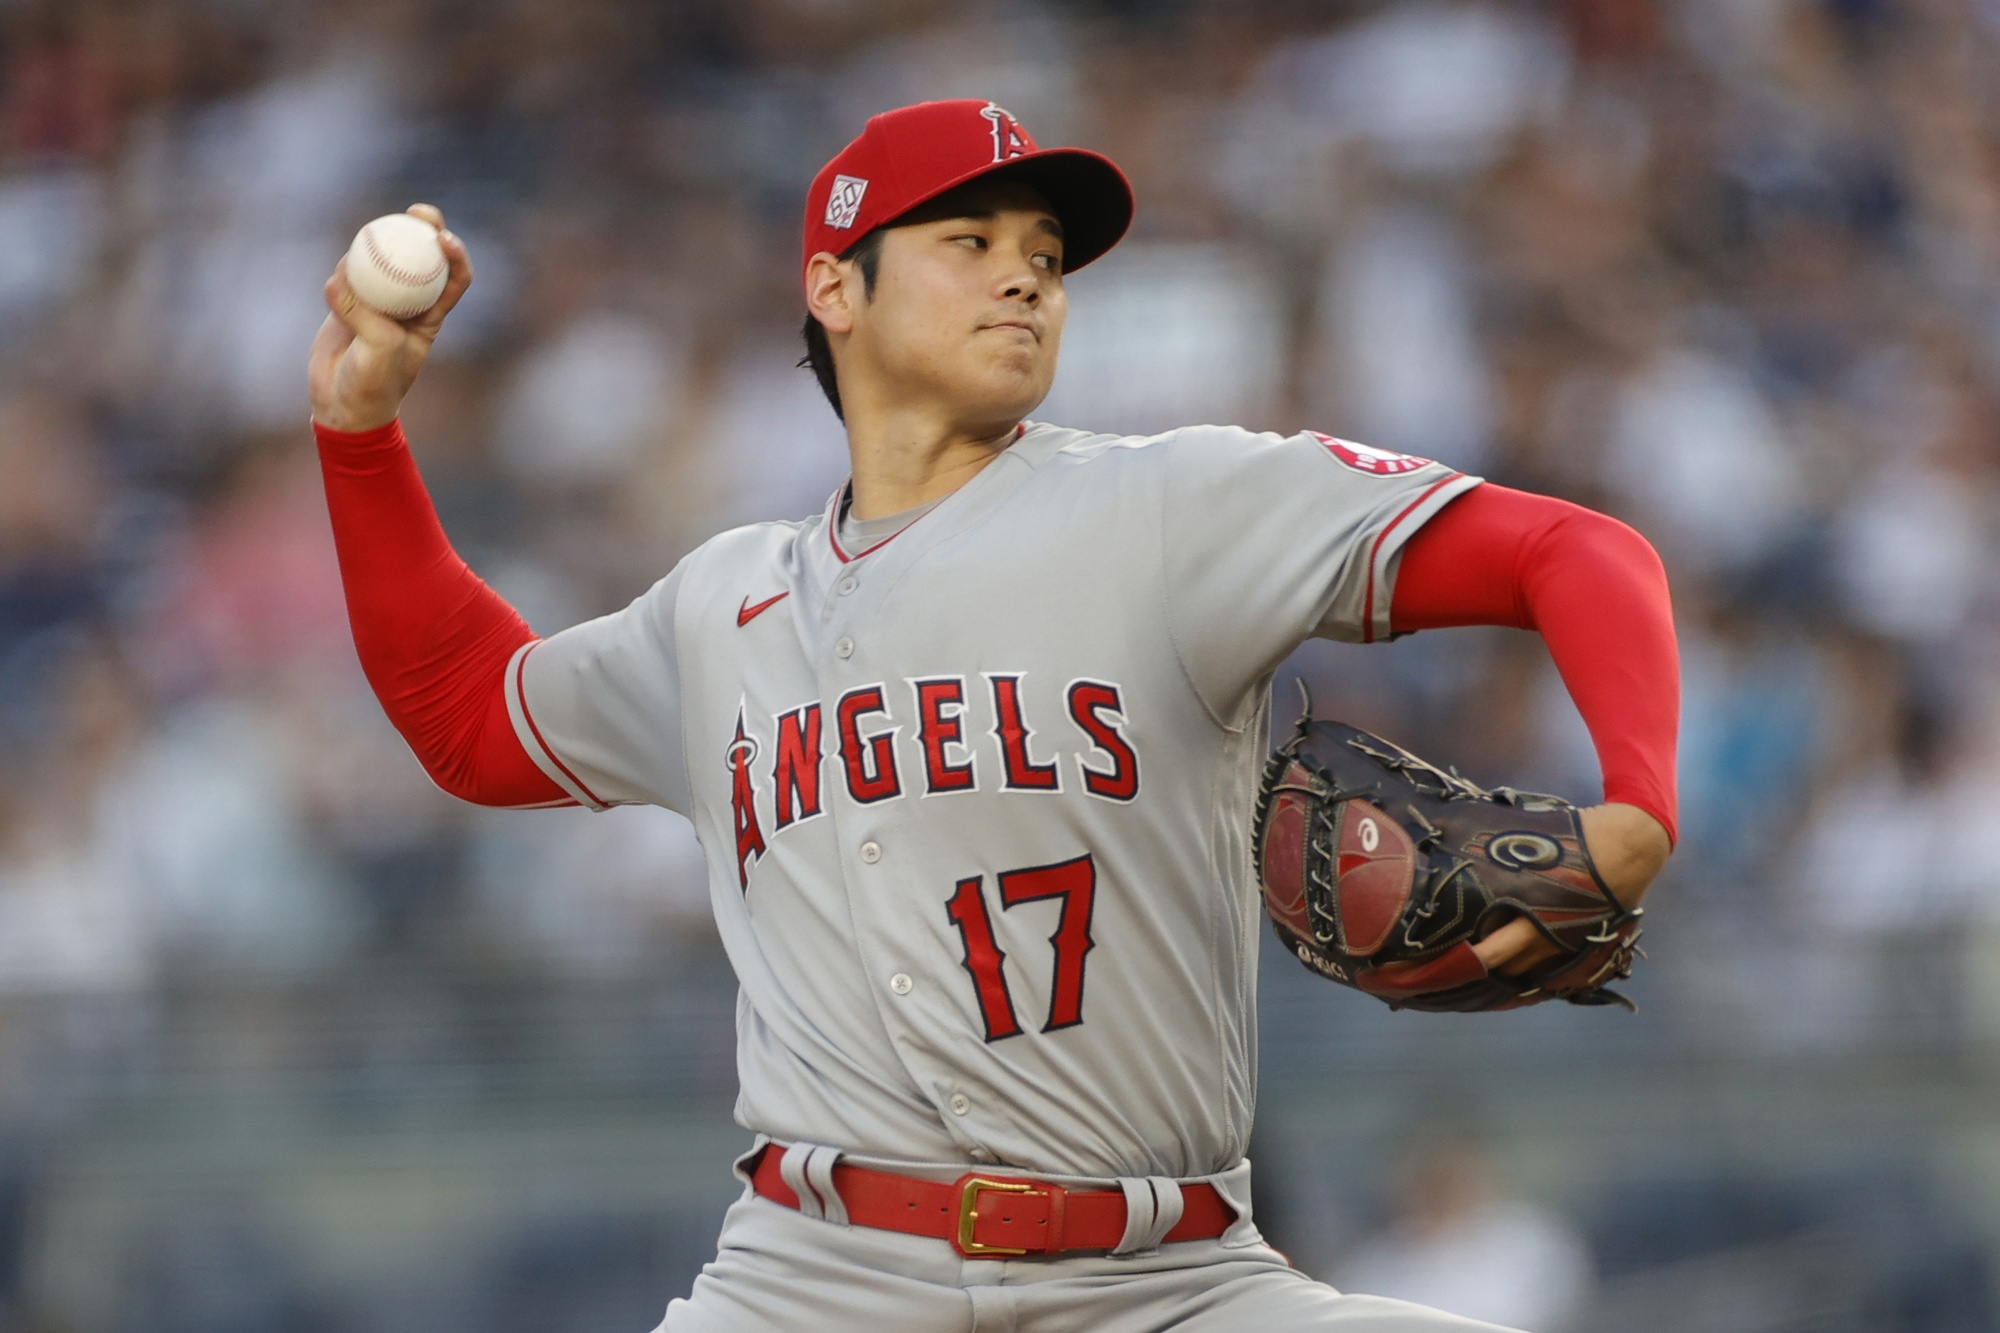 Shohei Ohtani received his AL MVP award tonight… along with every other  baseball award possible it seems 🏆